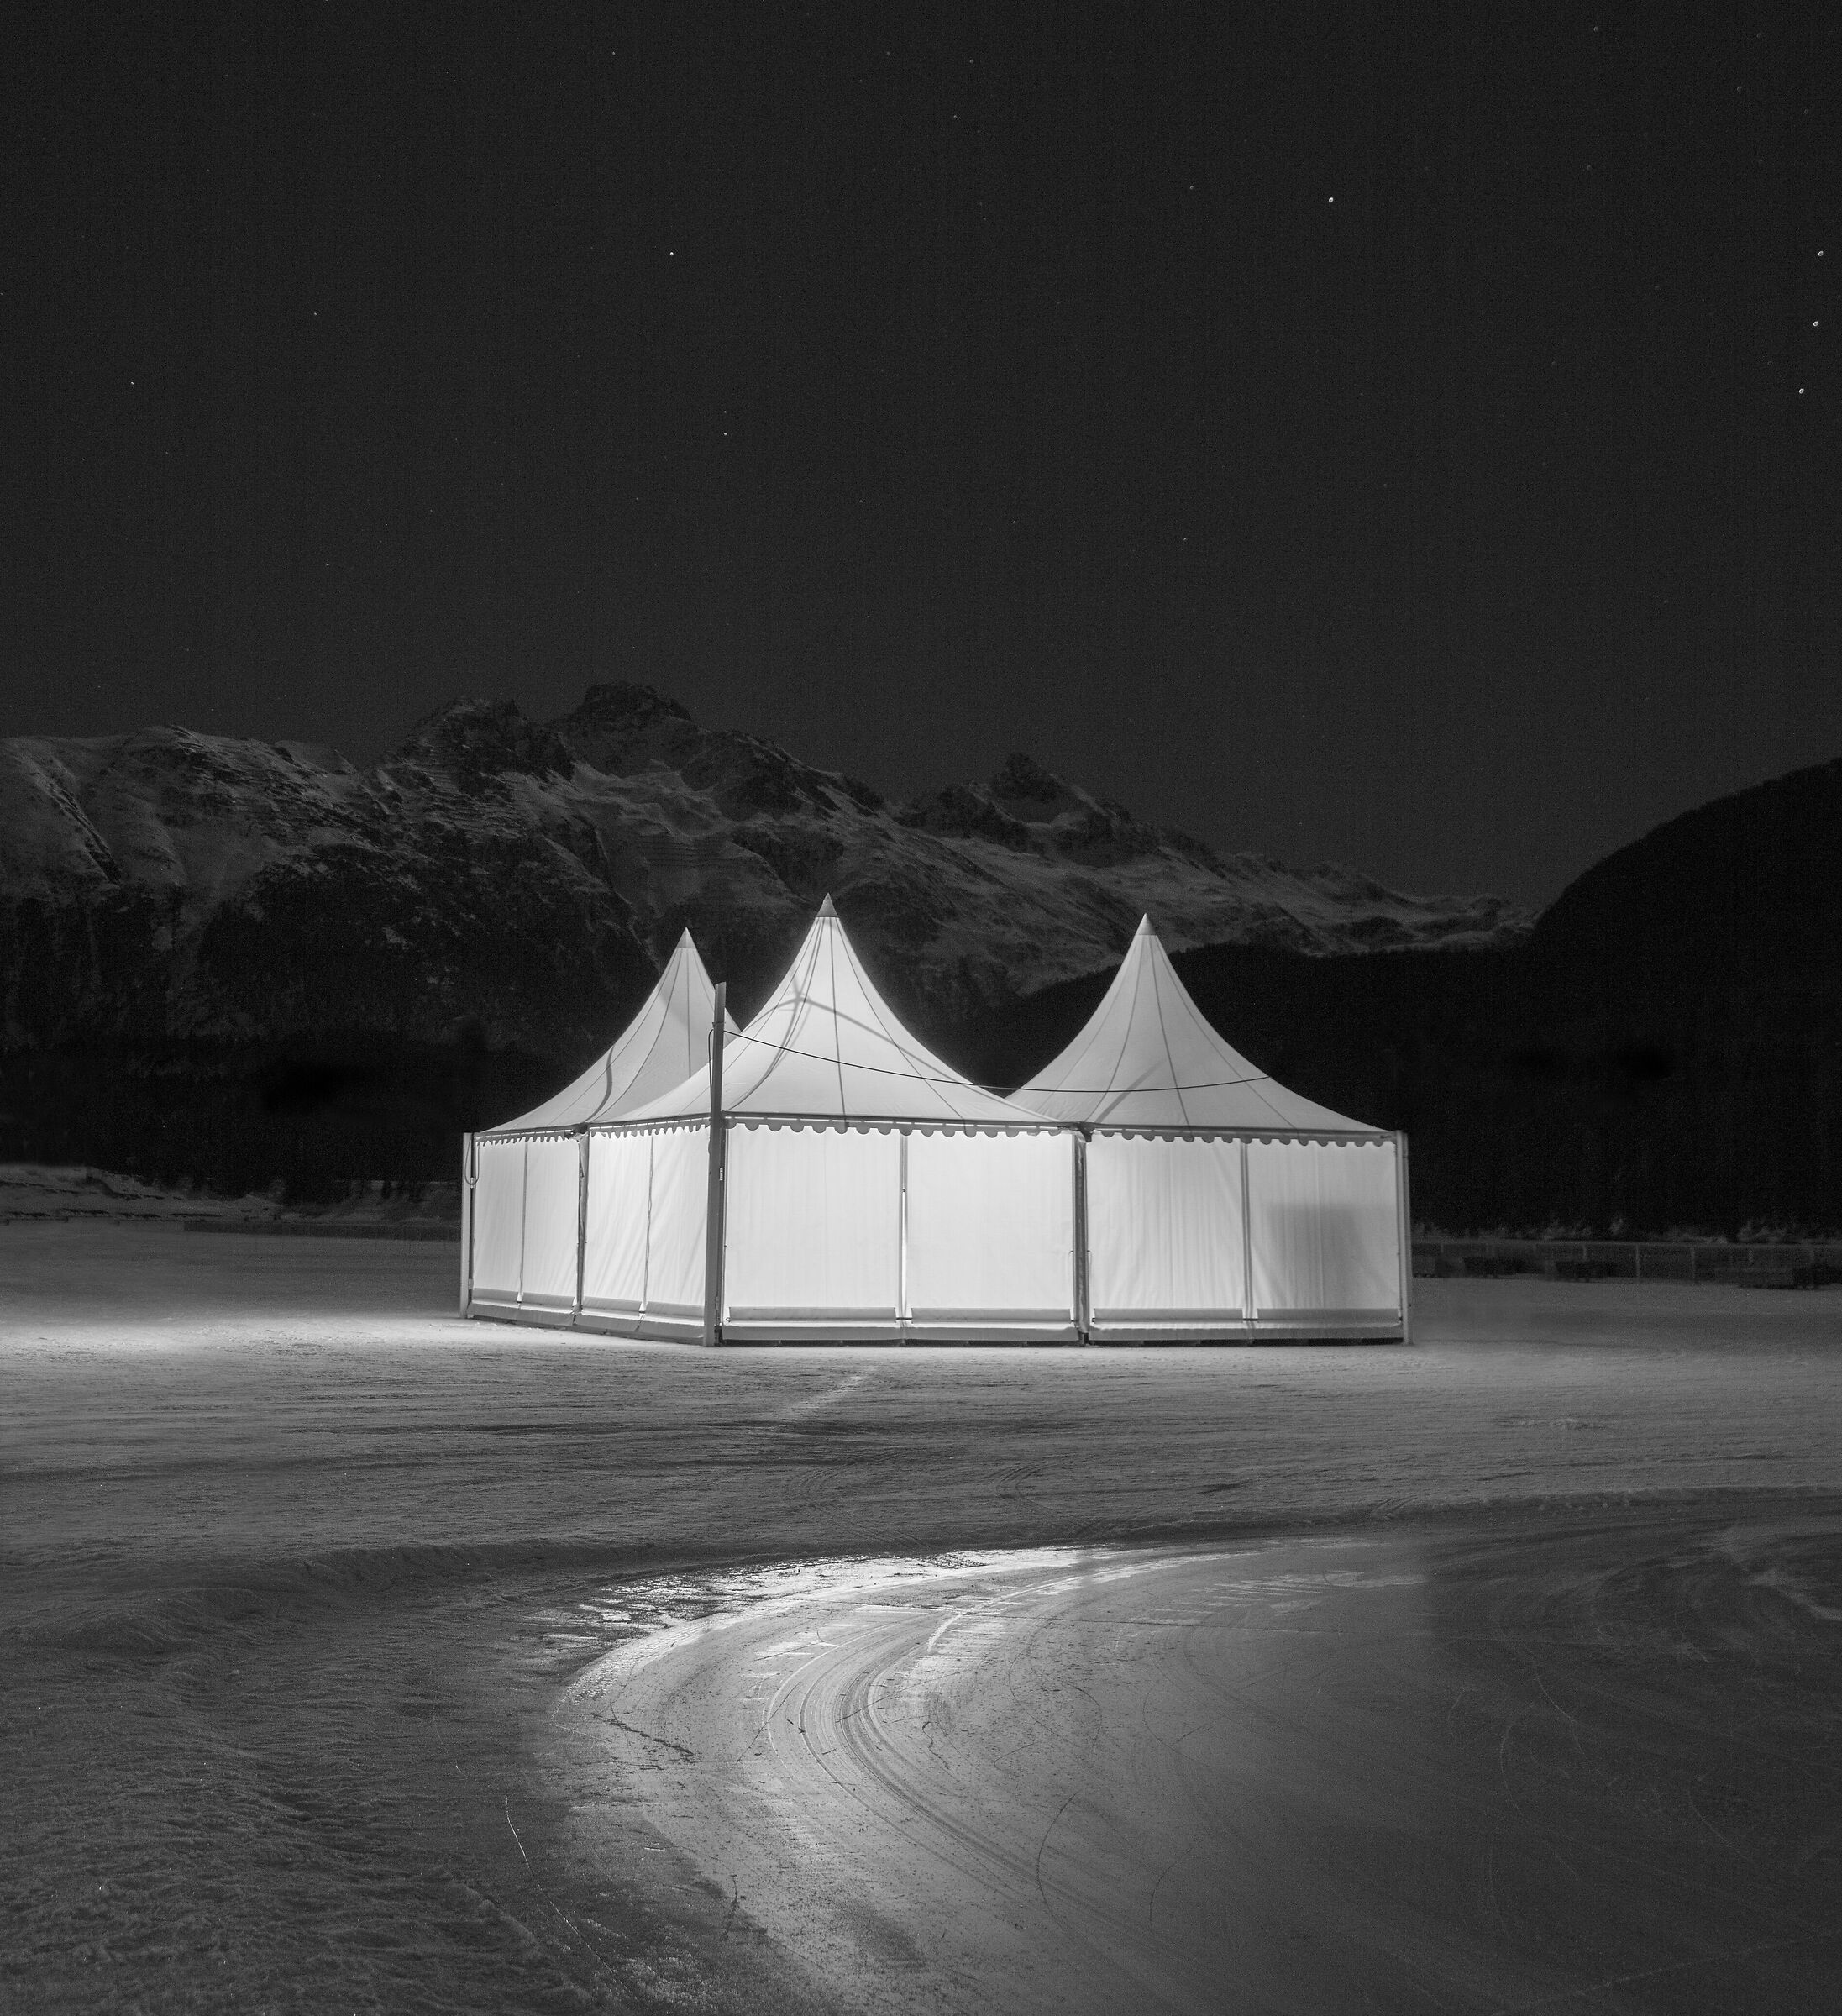 The tent on the frozen lake...